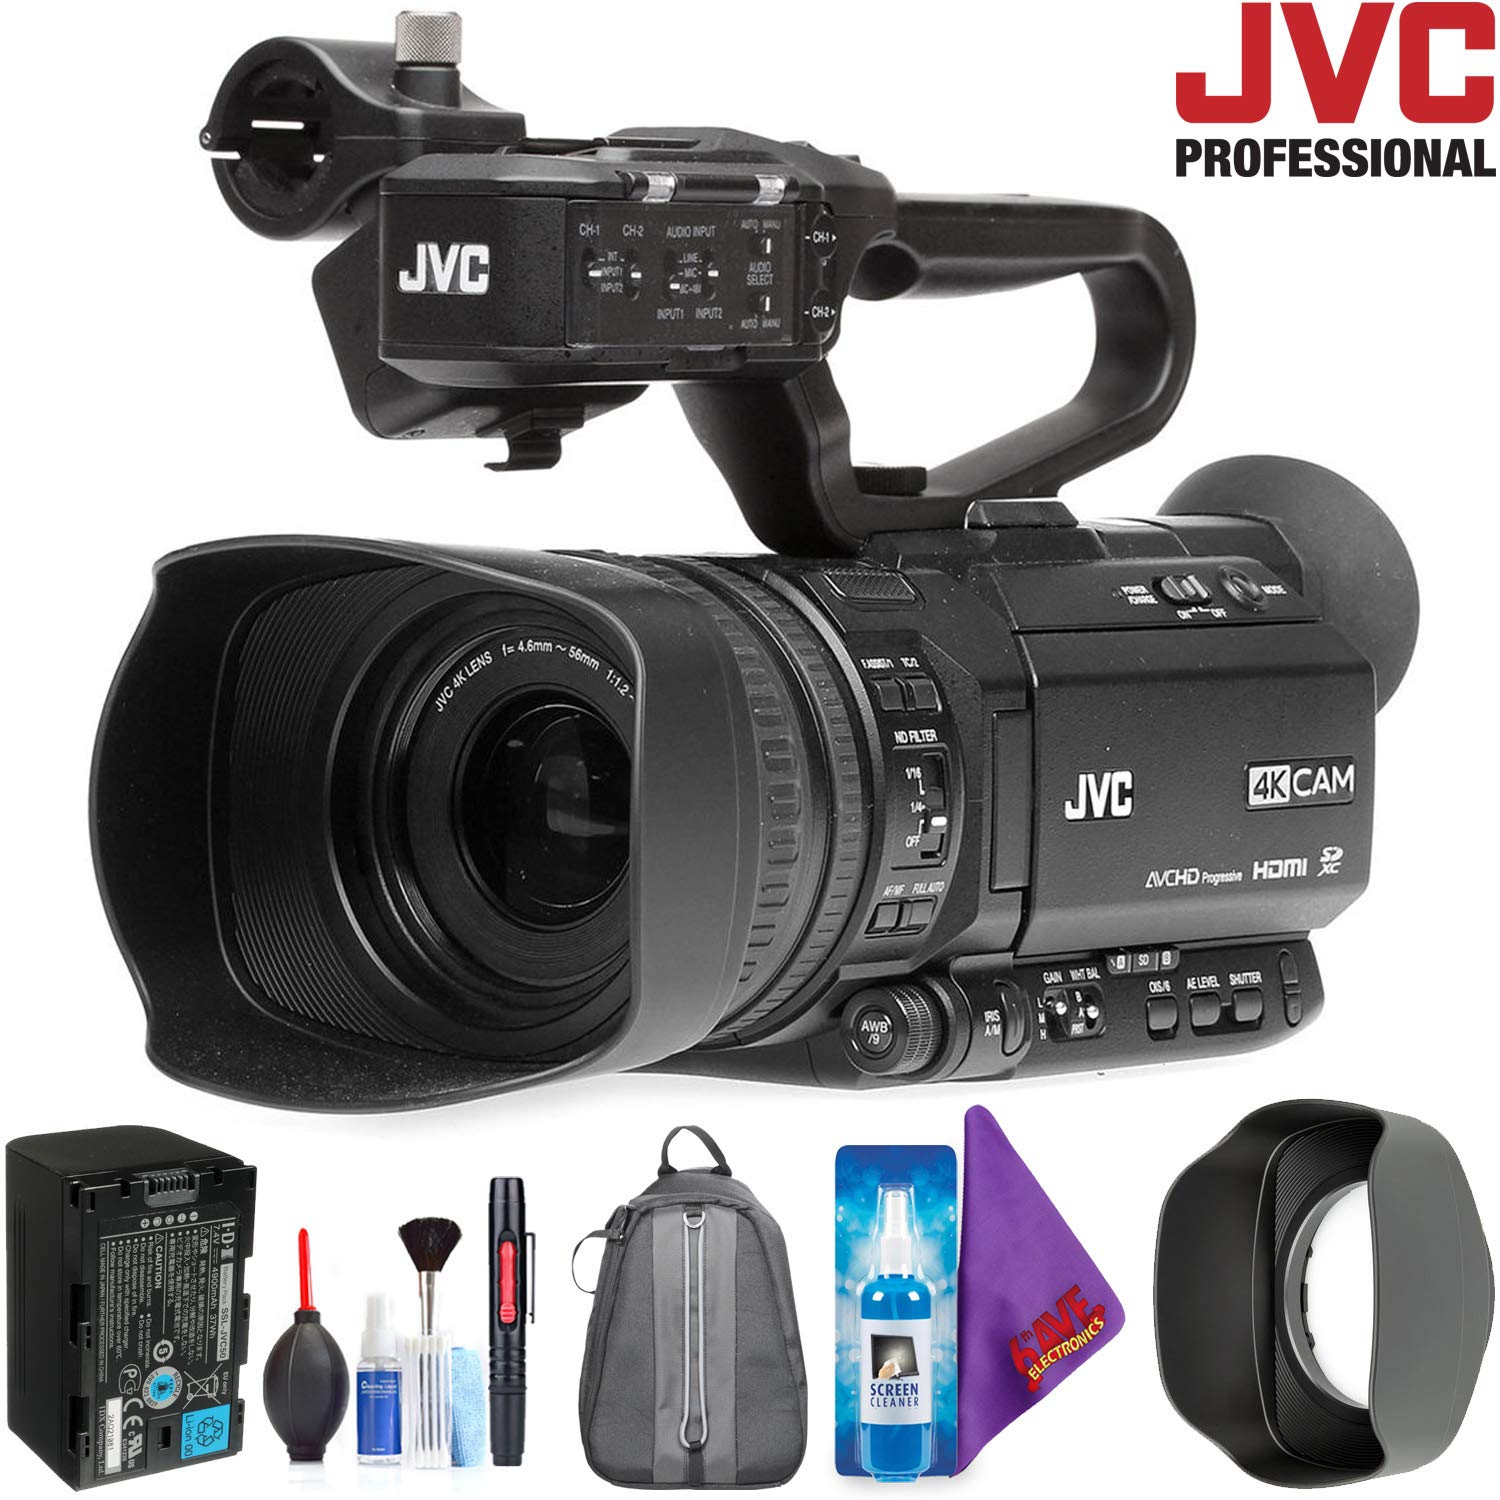 JVC GY-HM250 UHD 4K Streaming Camcorder with Built-in Lower-Thirds Graphics + Pro Accessories Bundle